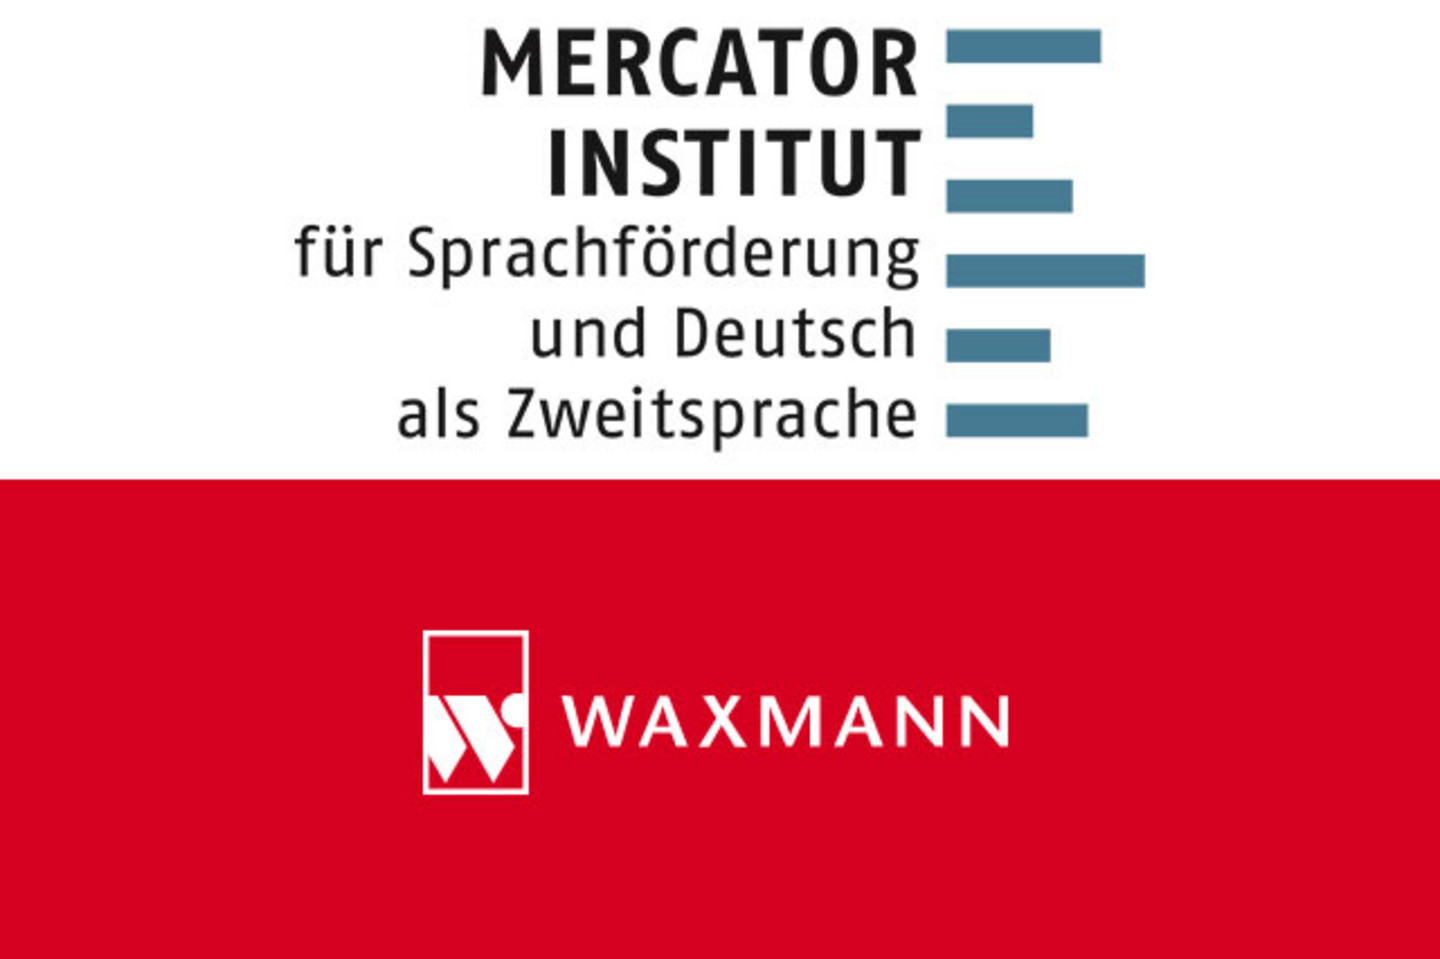 Logo of the Mercator Institute and the Waxmann publishing house